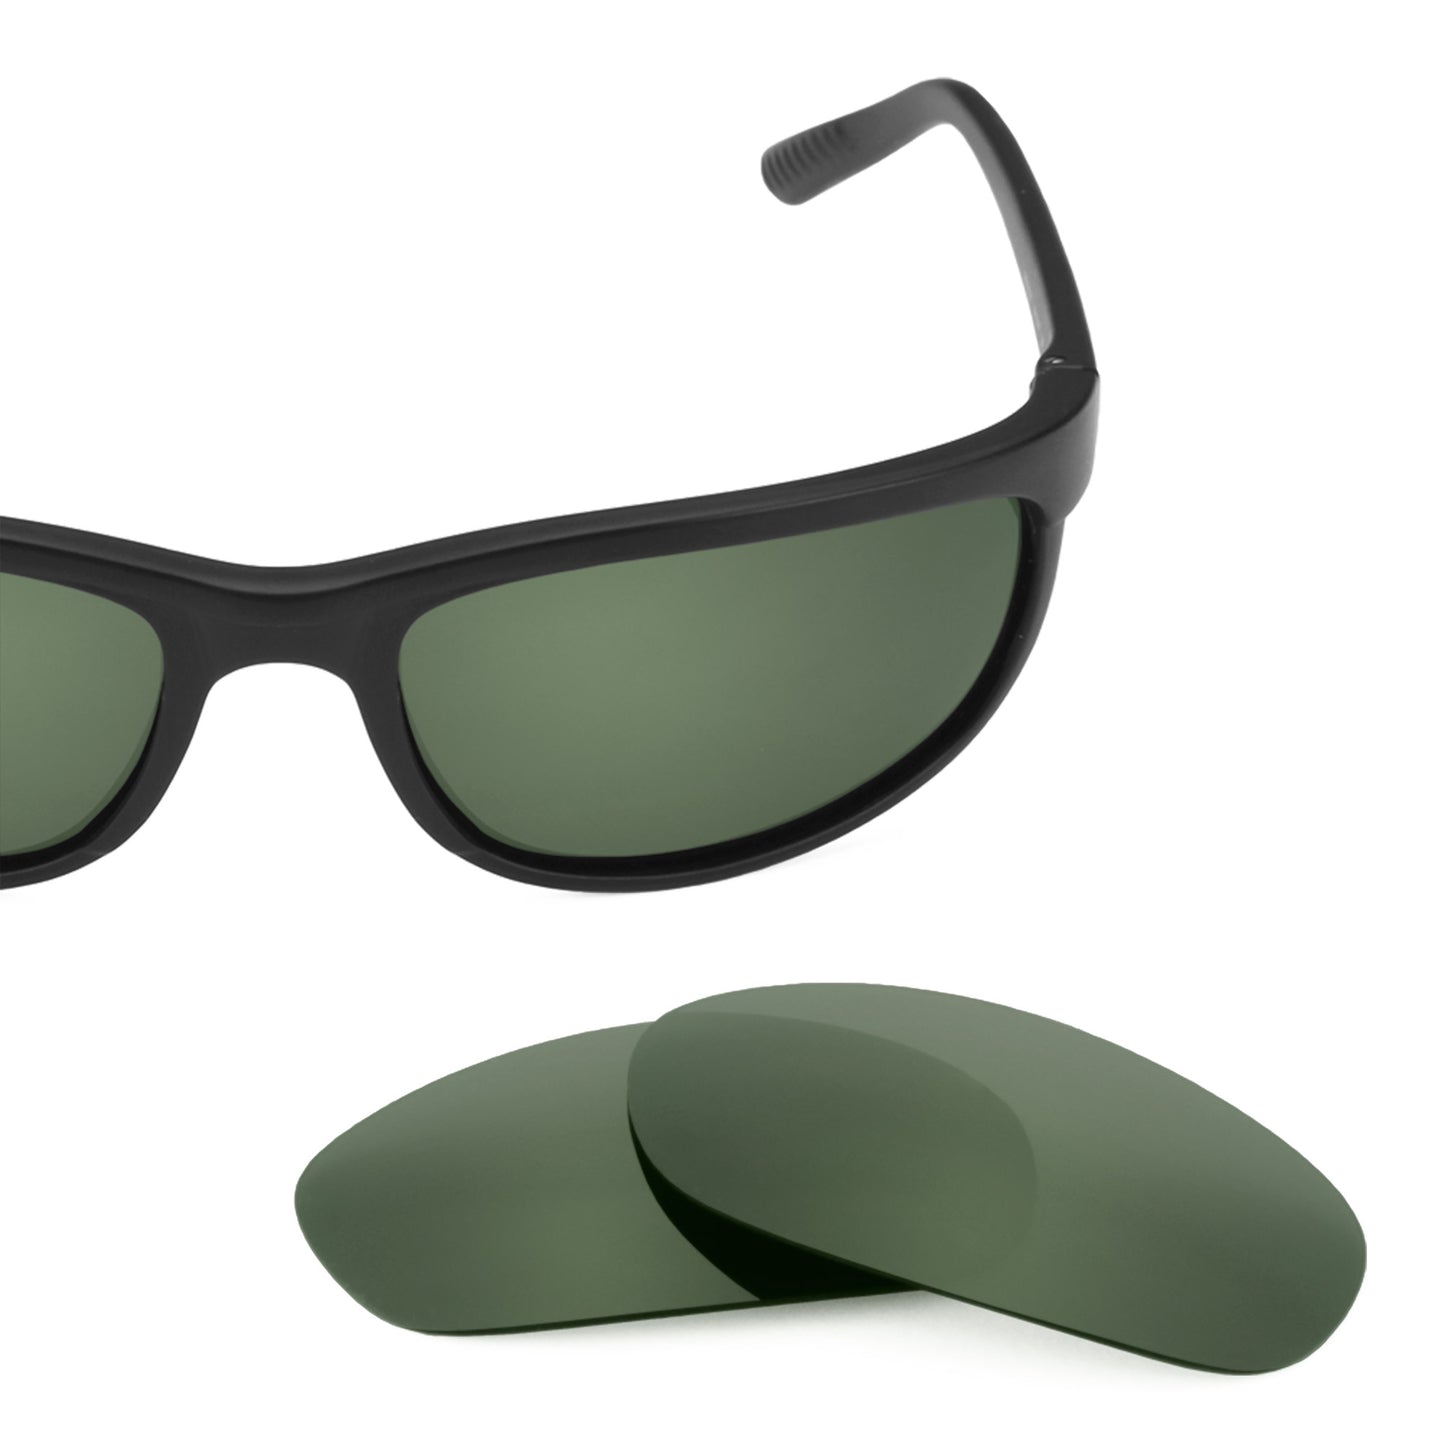 Revant replacement lenses for Ray-Ban Predator 2 RB2027 62mm Non-Polarized Gray Green